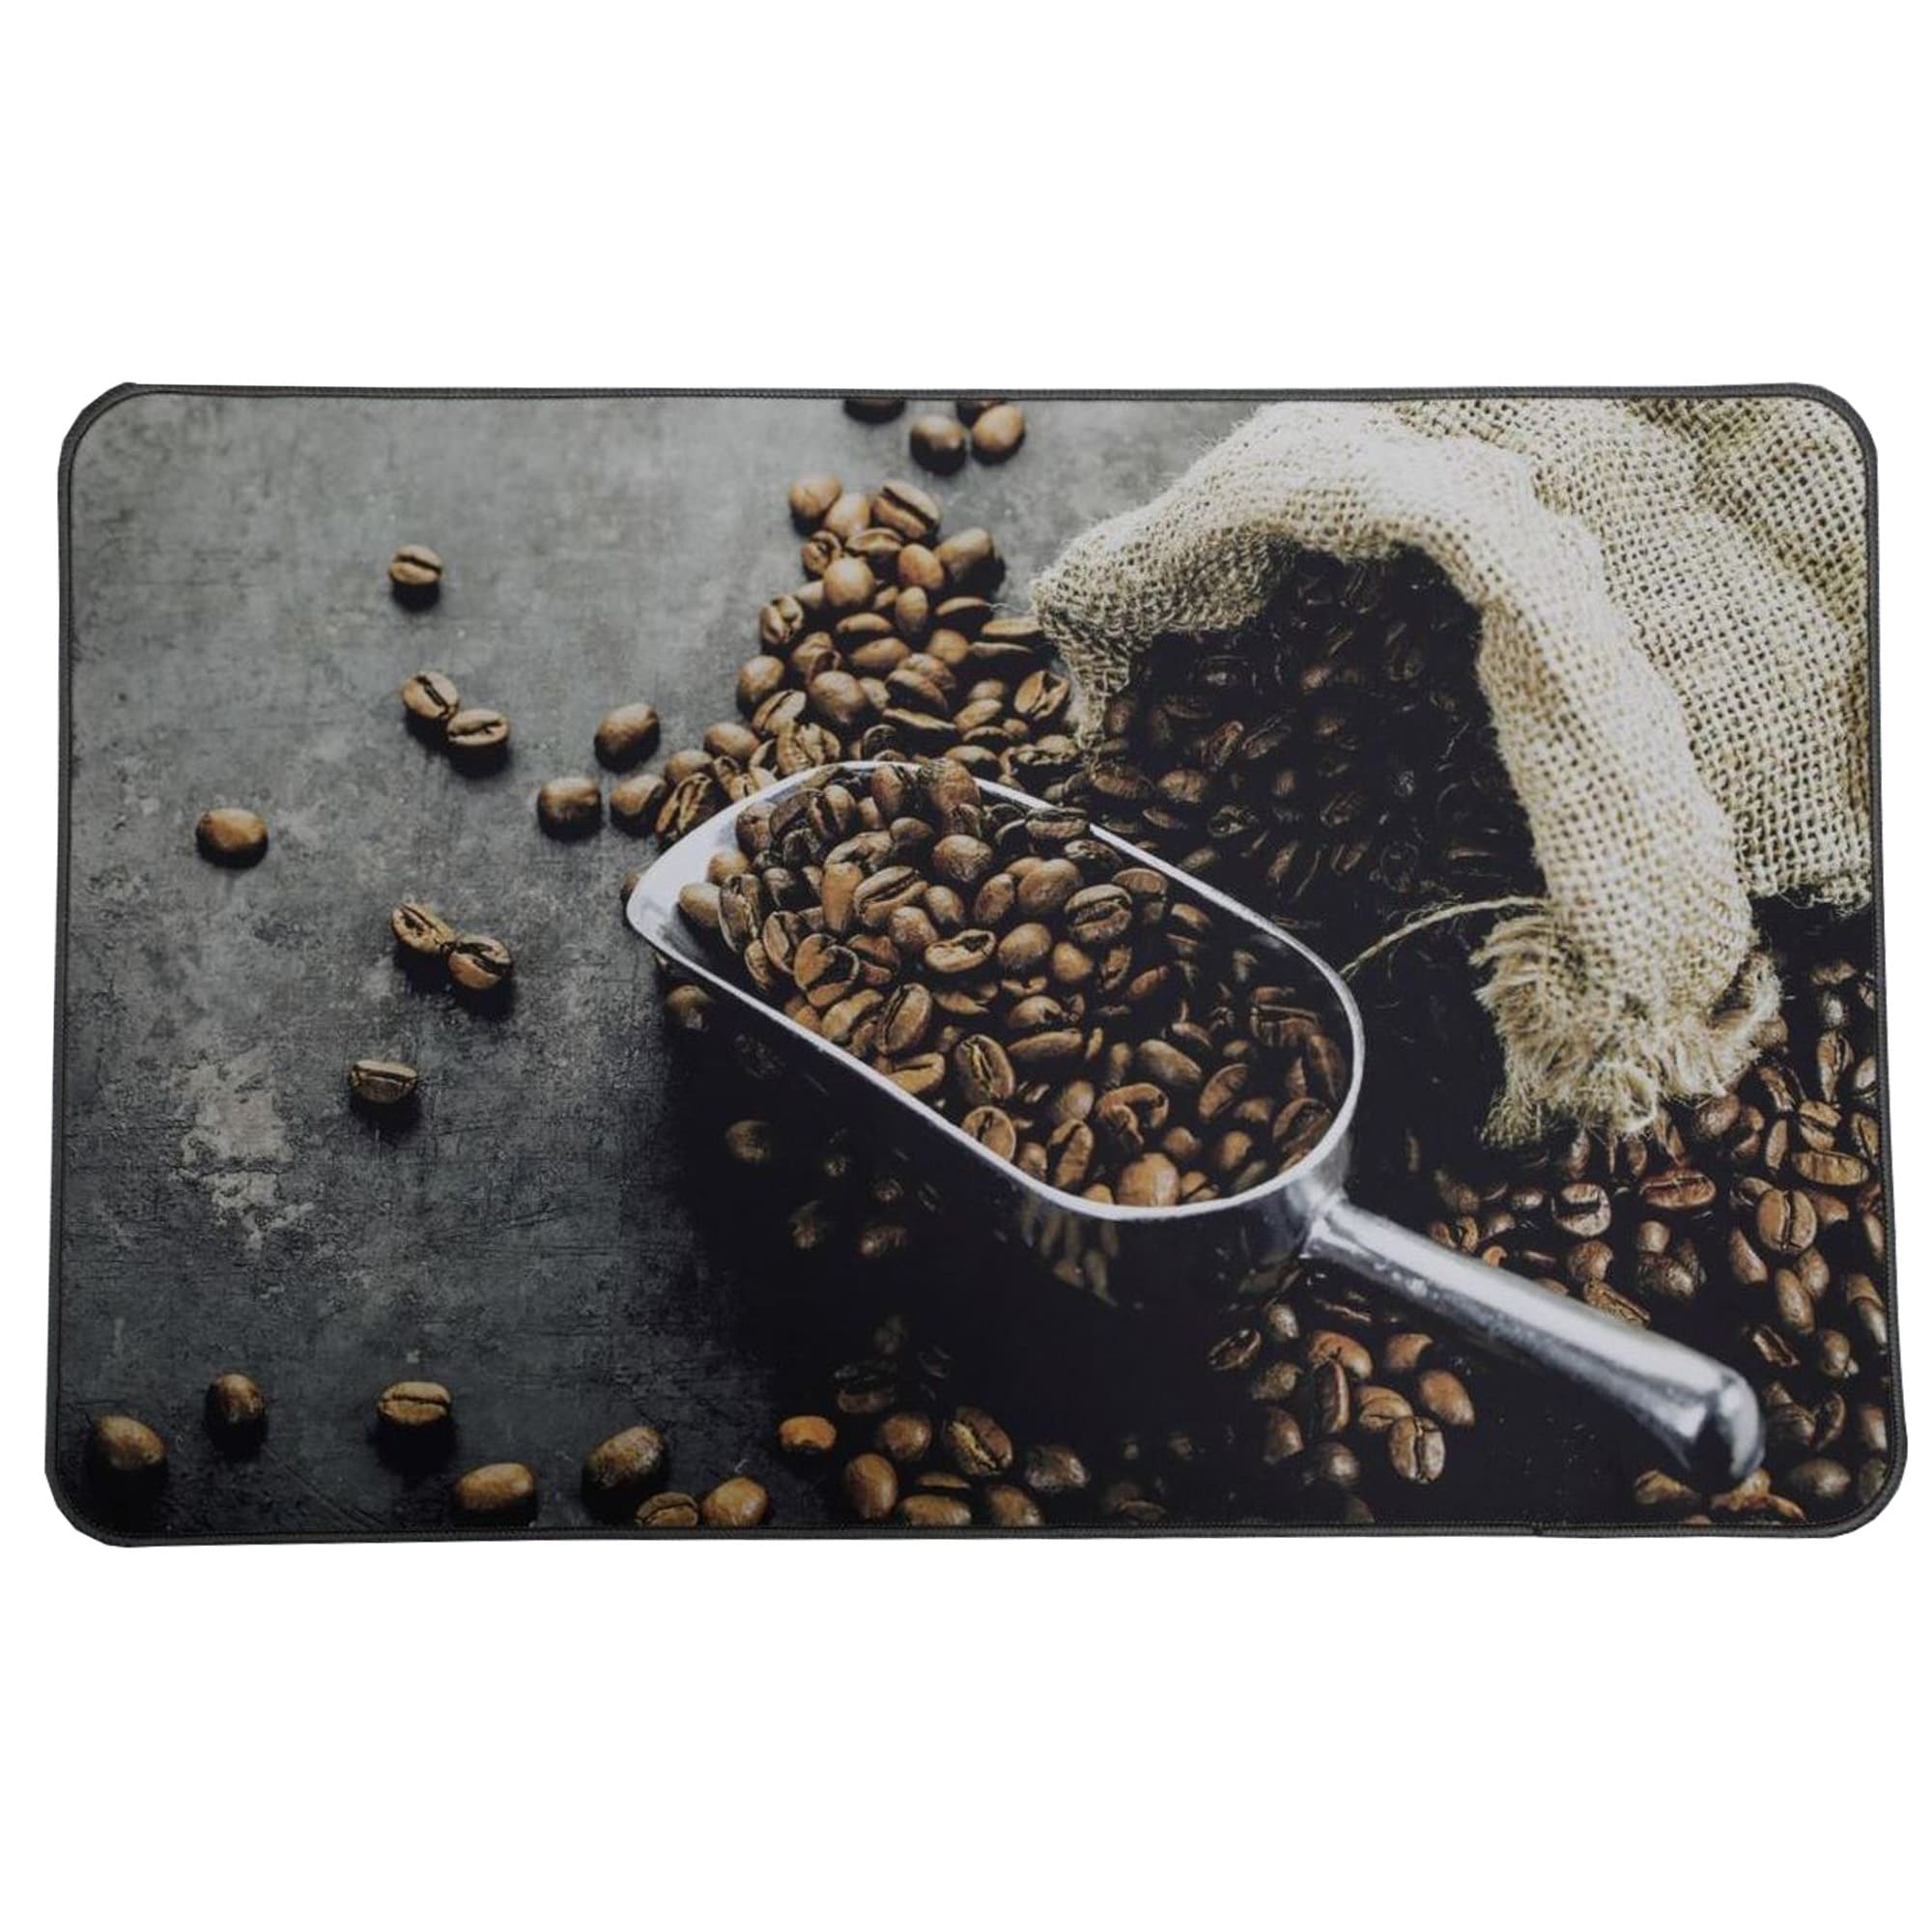 https://ak1.ostkcdn.com/images/products/is/images/direct/83b69bc4ecf83f92ef867cc007bd22f02e873f3f/Coffee-Anti-Fatigue-Kitchen-Floor-Mat-32%22-x-20%22.jpg